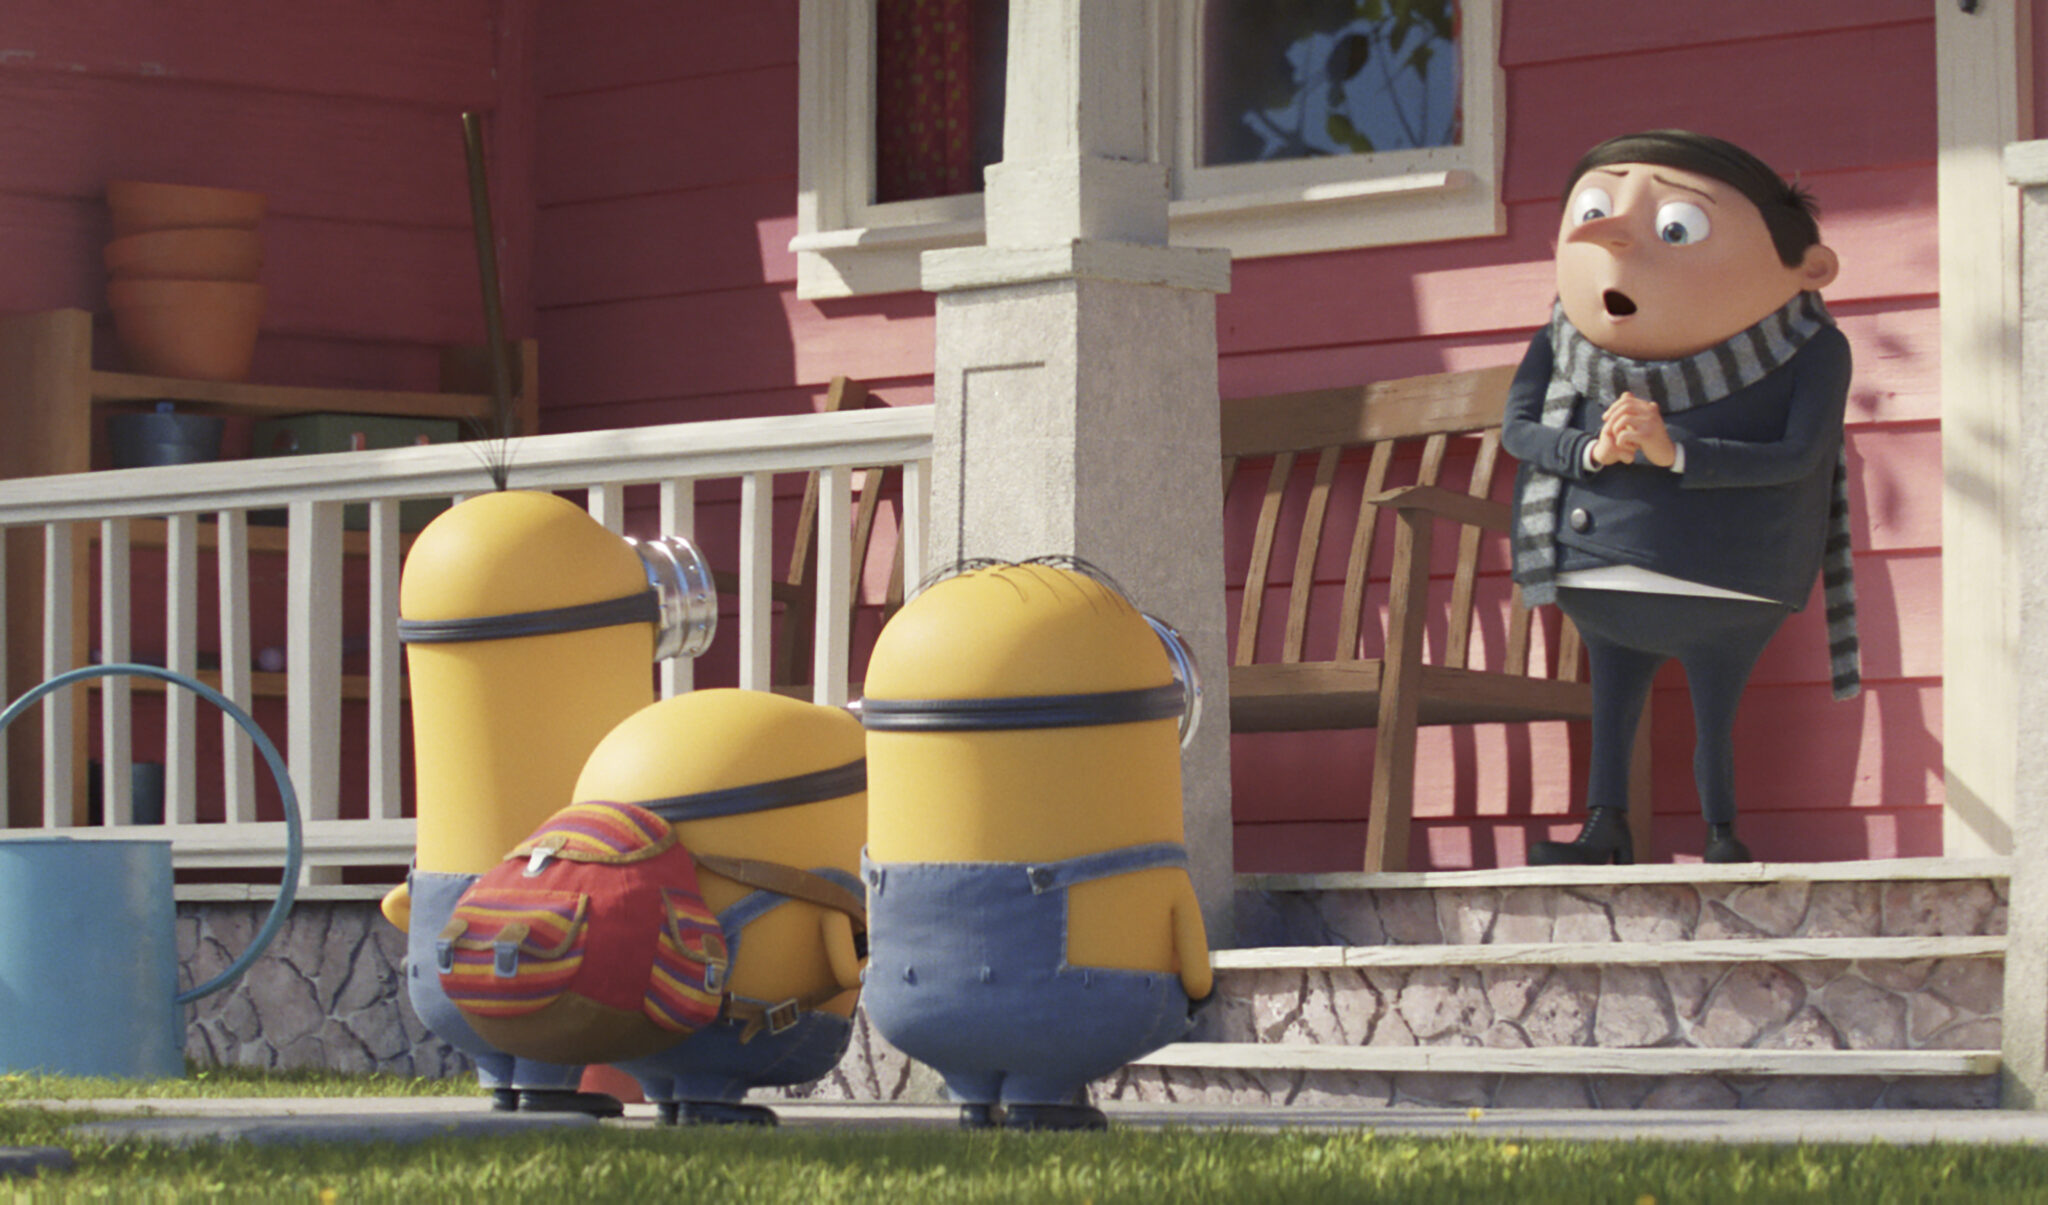 Minions: The Rise of Gru— coming to theaters in July! #Minions #TheRiseofGru